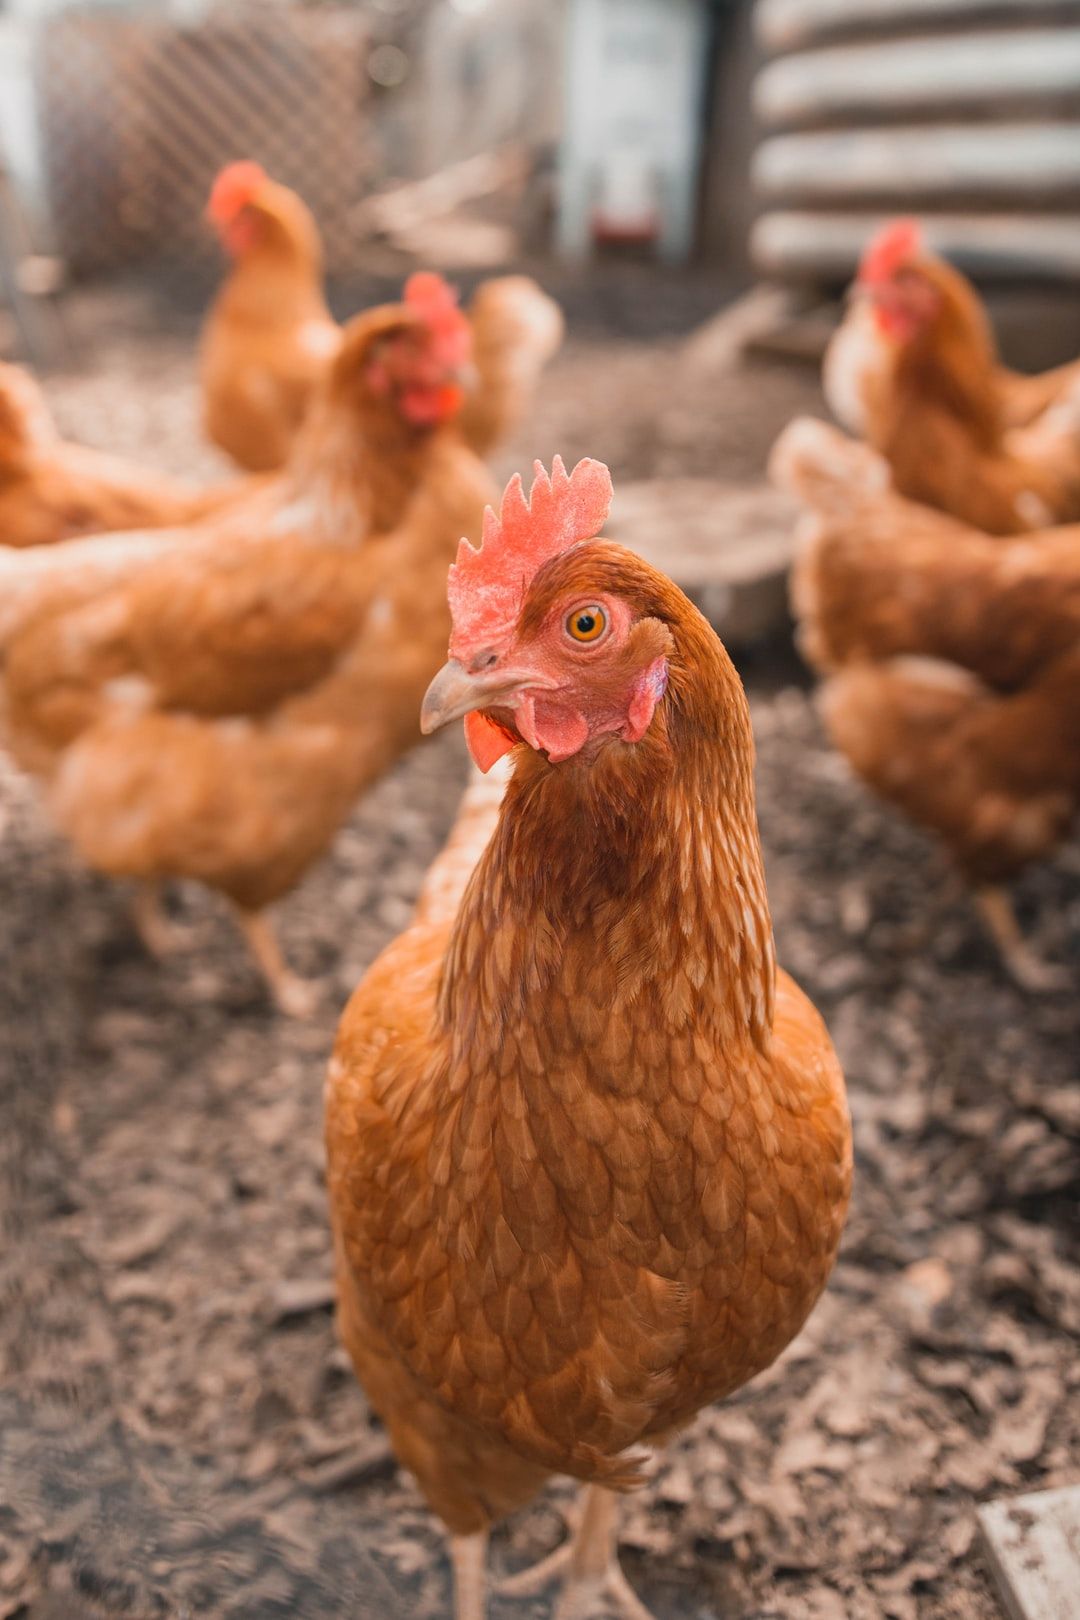 Chickens Picture. Download Free Image